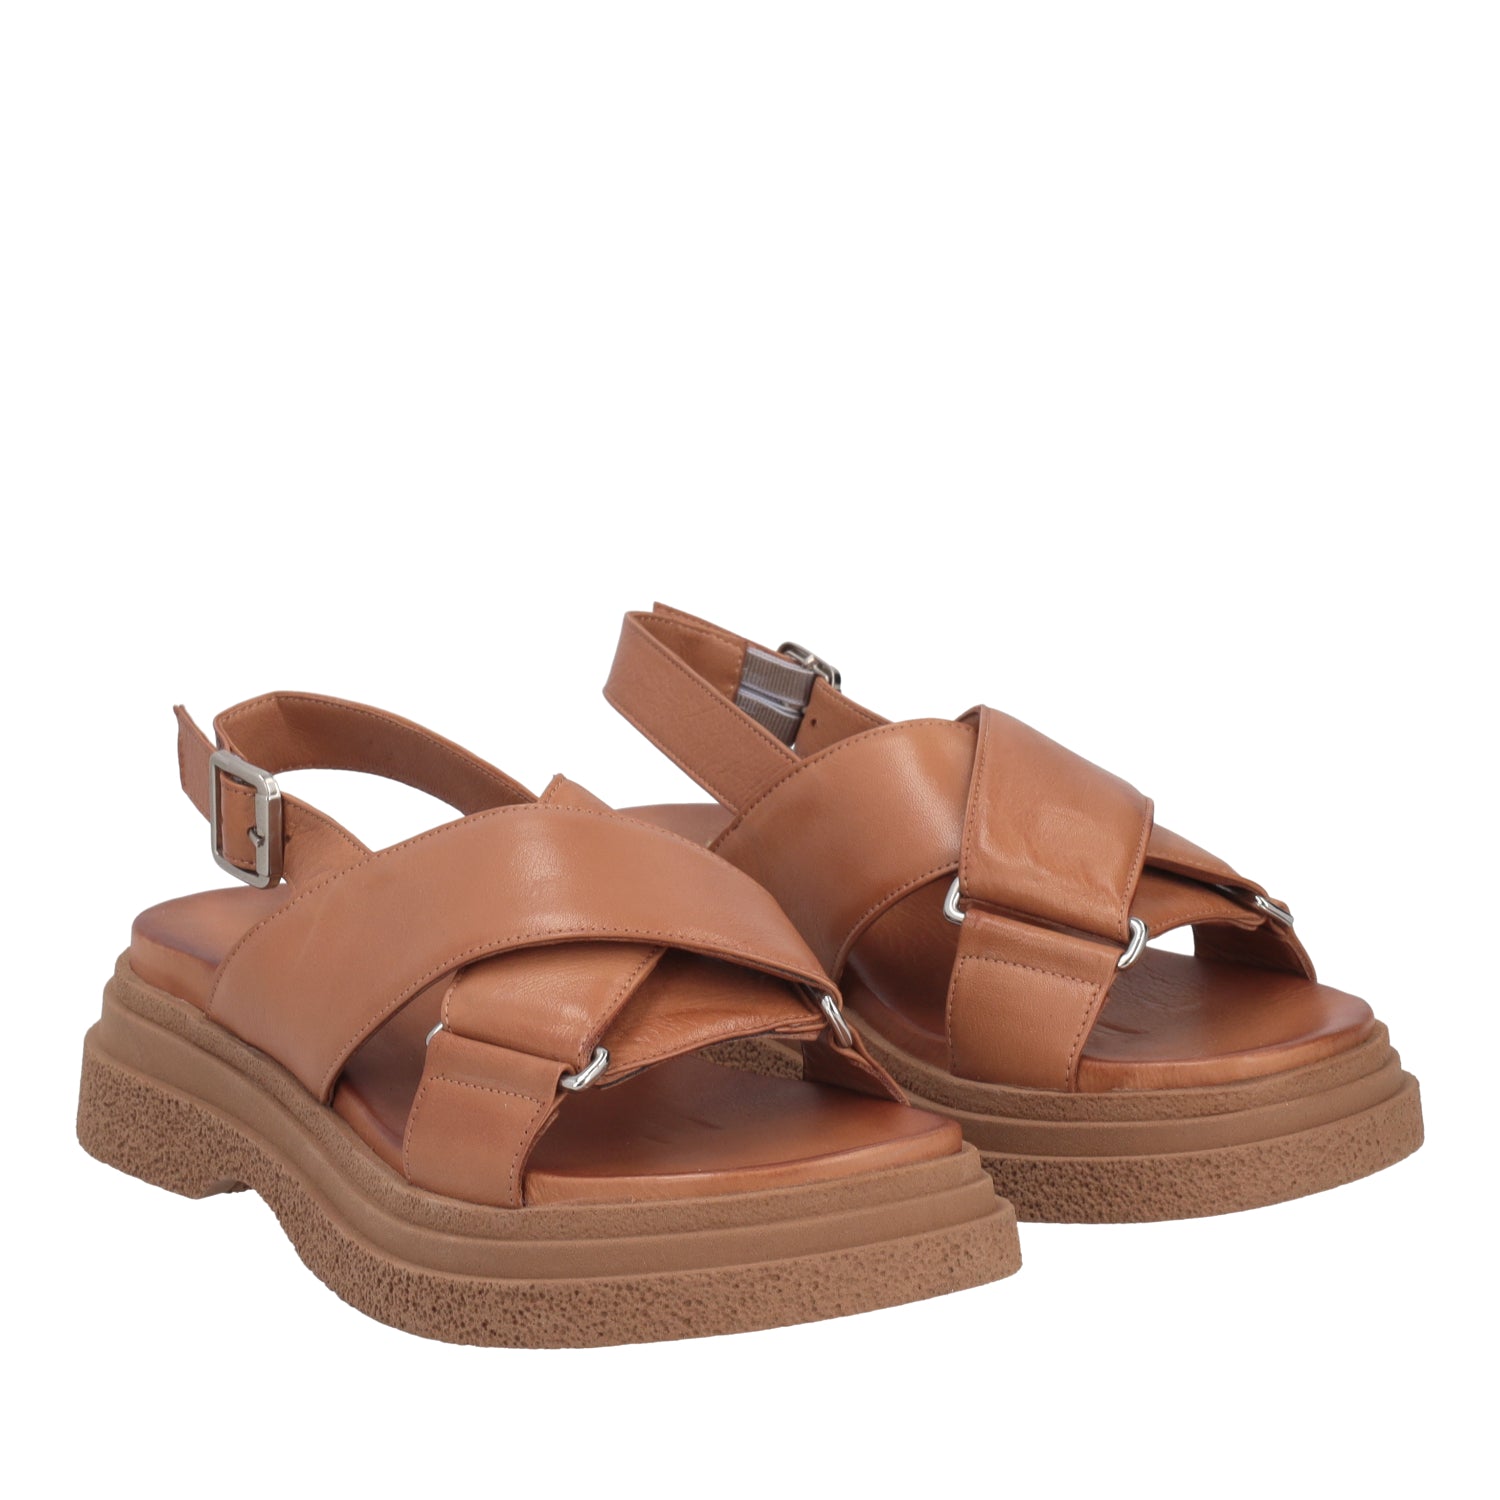 TAN MARTINA SANDAL WITH CROSSED STRAPS